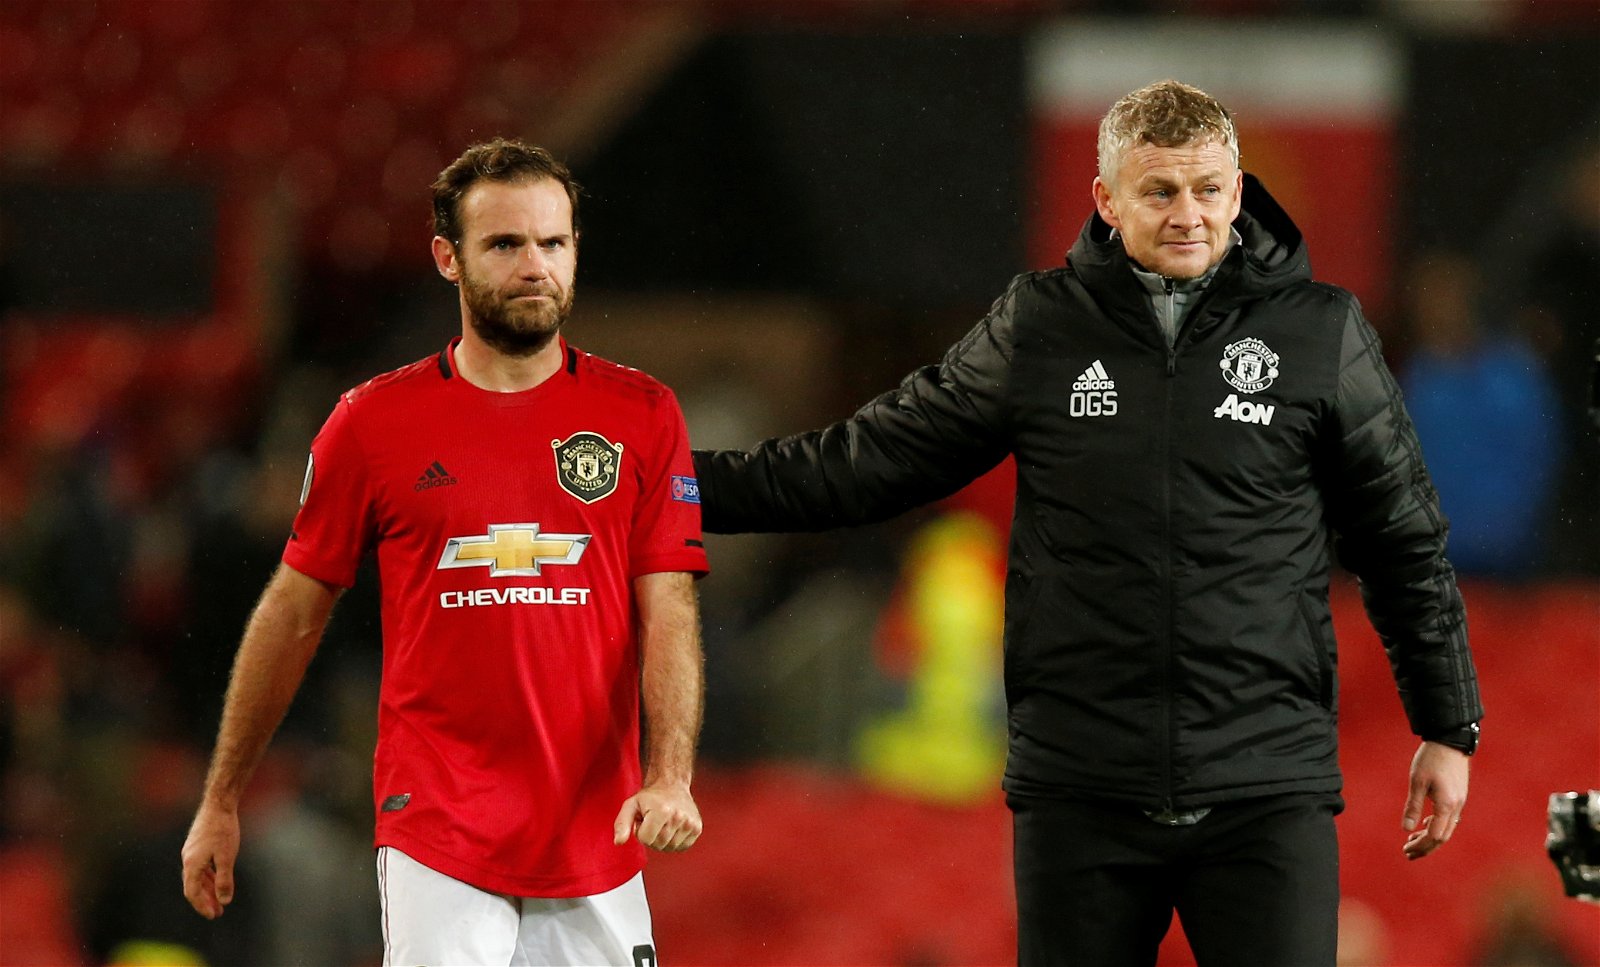 Ole hoping to make fans happy